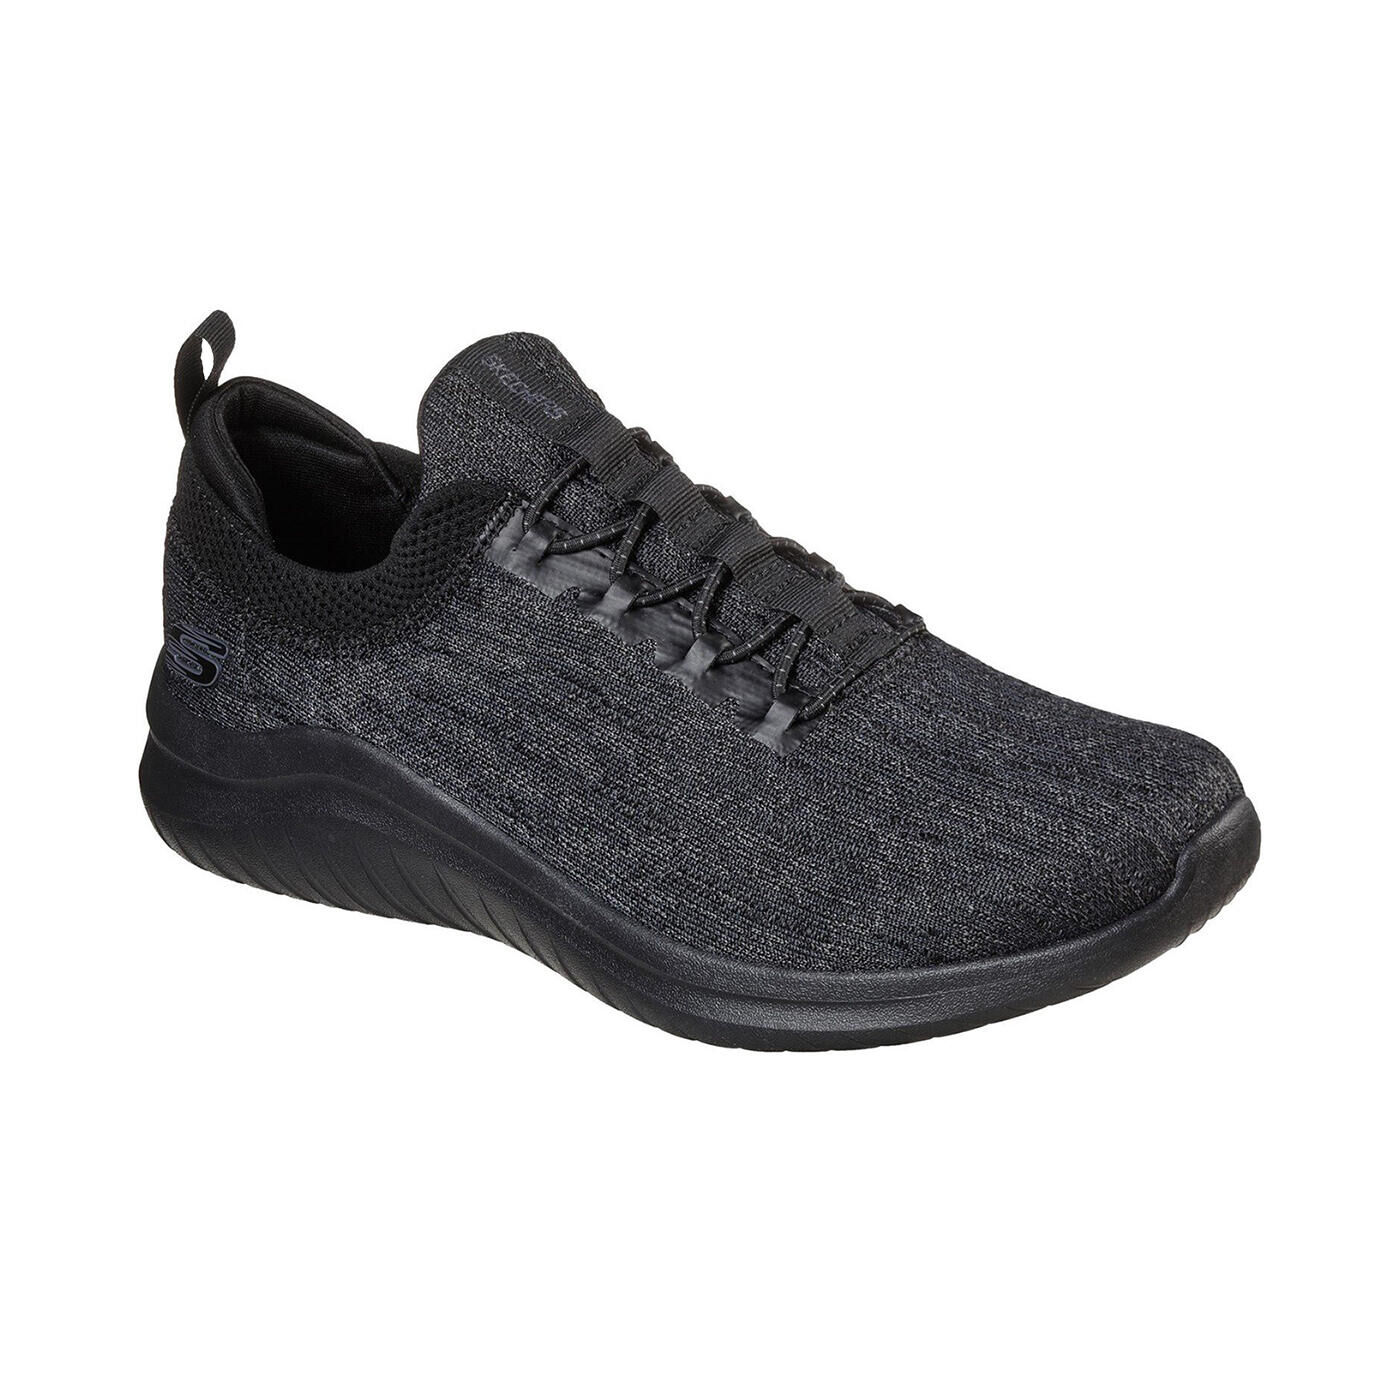 SKECHERS Mens Ultra Flex 2.0 Cryptic Trainers (Black)